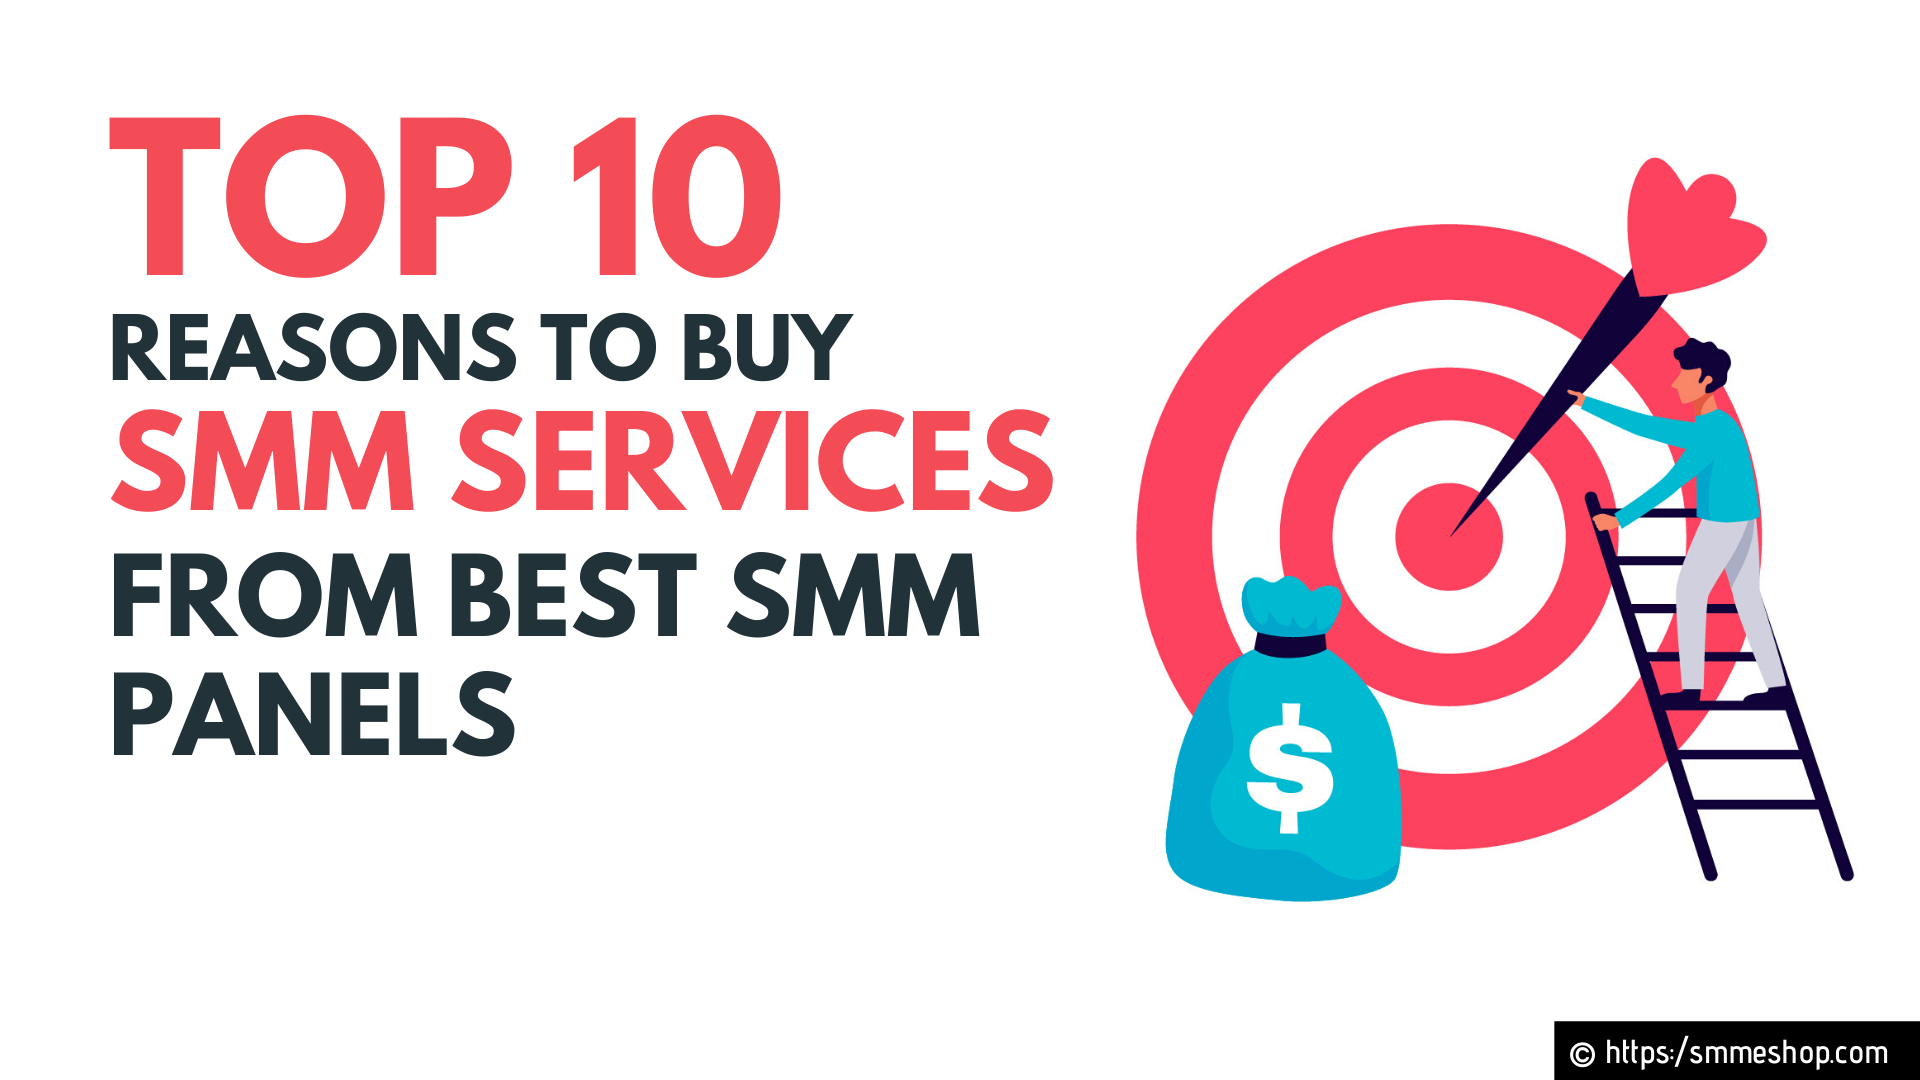 Top 10 Reasons to Buy SMM Services from Best SMM Panels